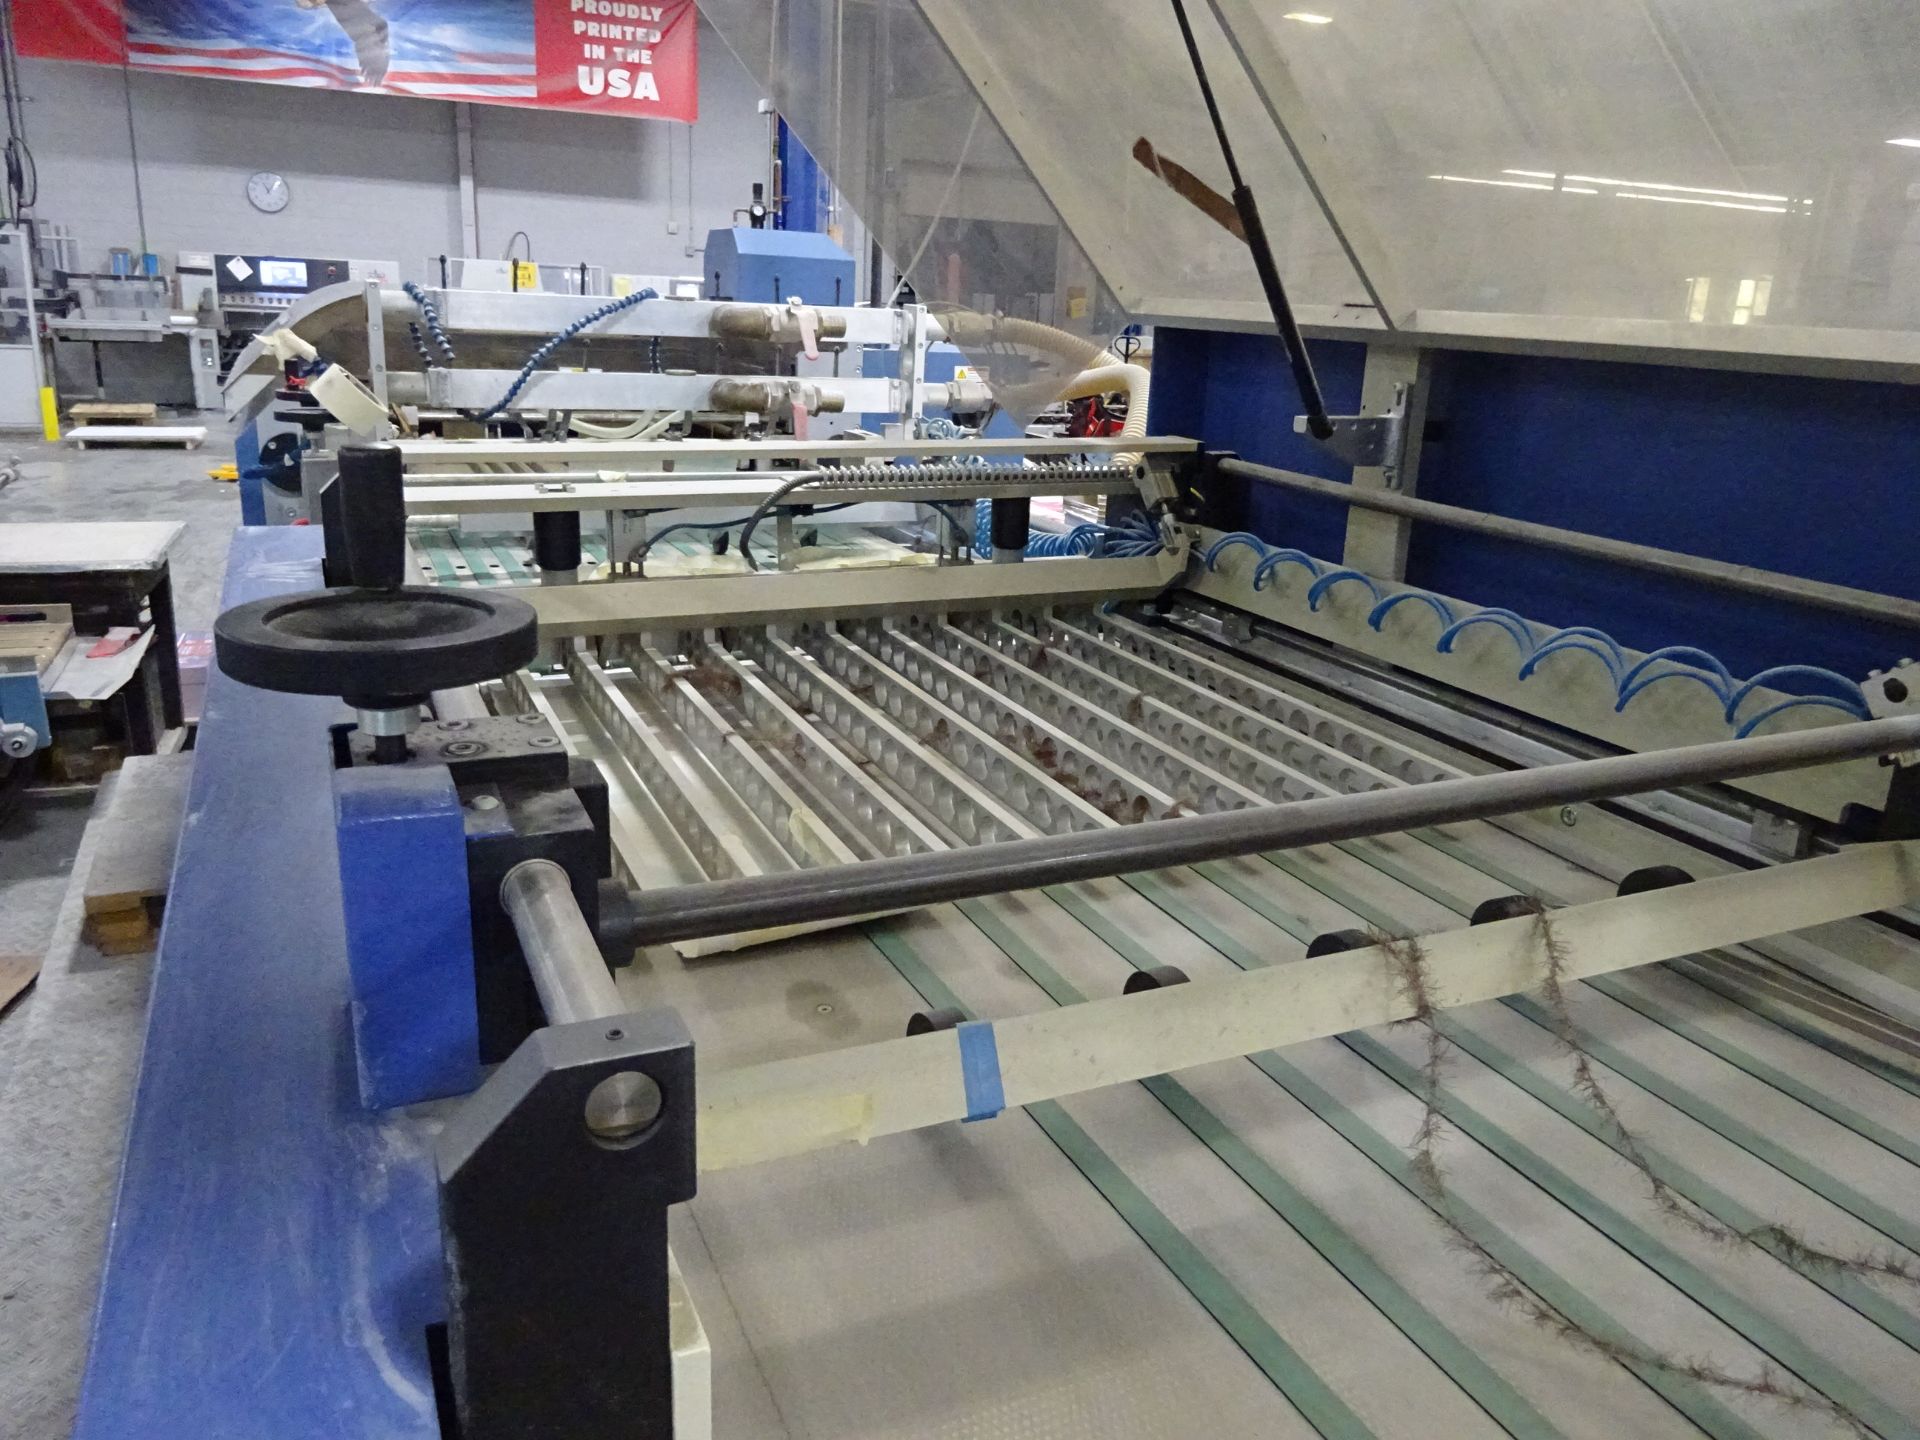 2012 MBO Sheet Stacking Section for Production Ink Jet Printers, Includes: EM770 Ejection Module, - Image 3 of 12